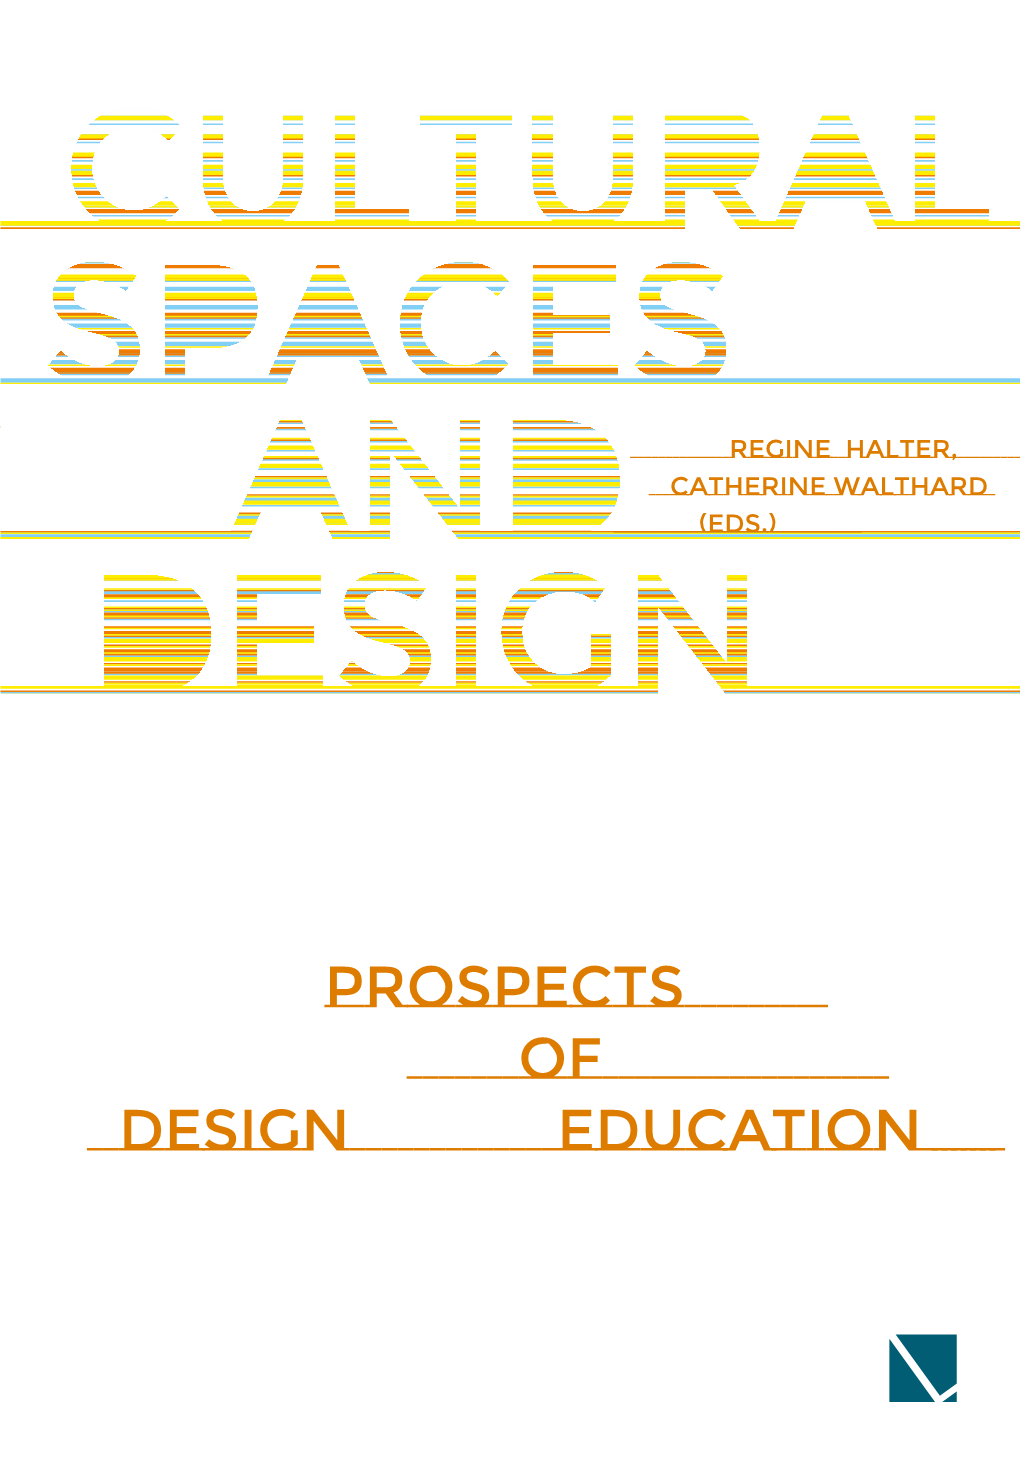 Prospects of Design Education Cultural Spaces and Design Regine Halter, Catherine Walthard (Eds.)